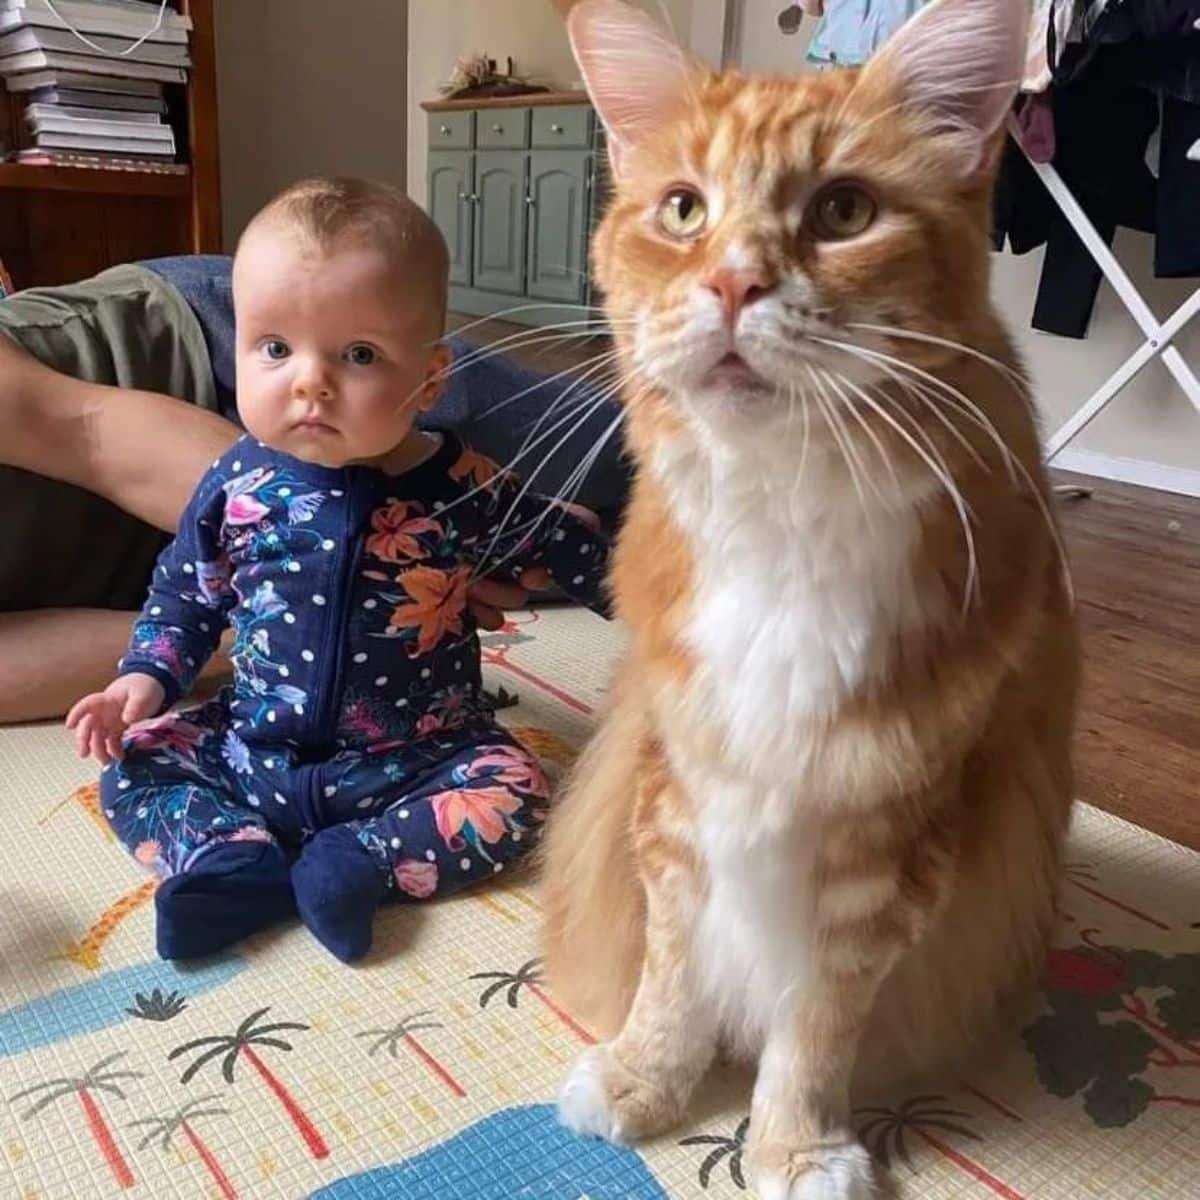 A big orange maine coon cat sitting next to a baby.